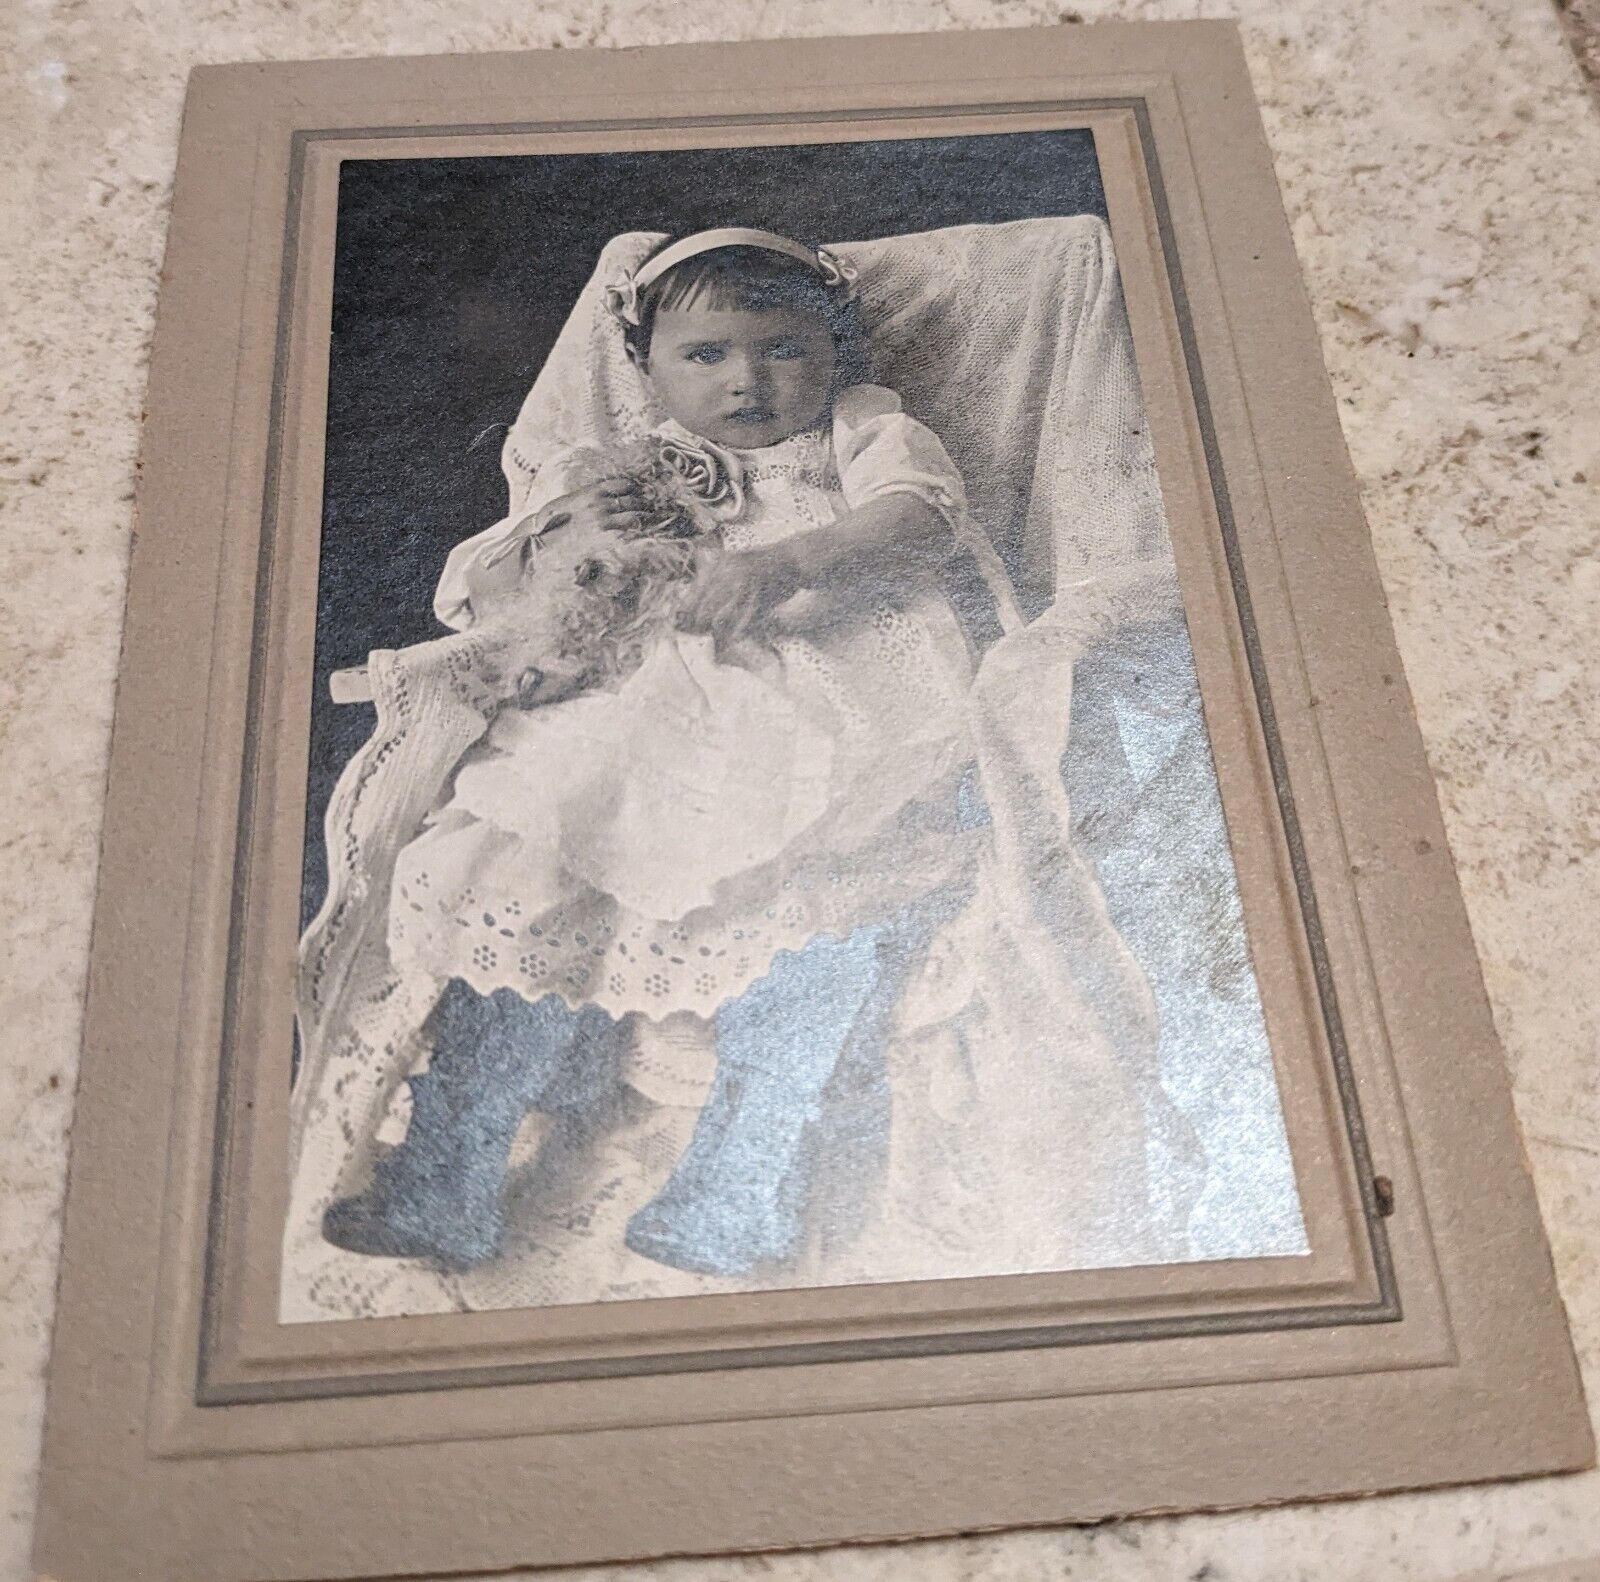 *RARE* VINTAGE LATE 1800'S PHOTO YOUNG GIRL WITH VINTAGE DOLL / TOY